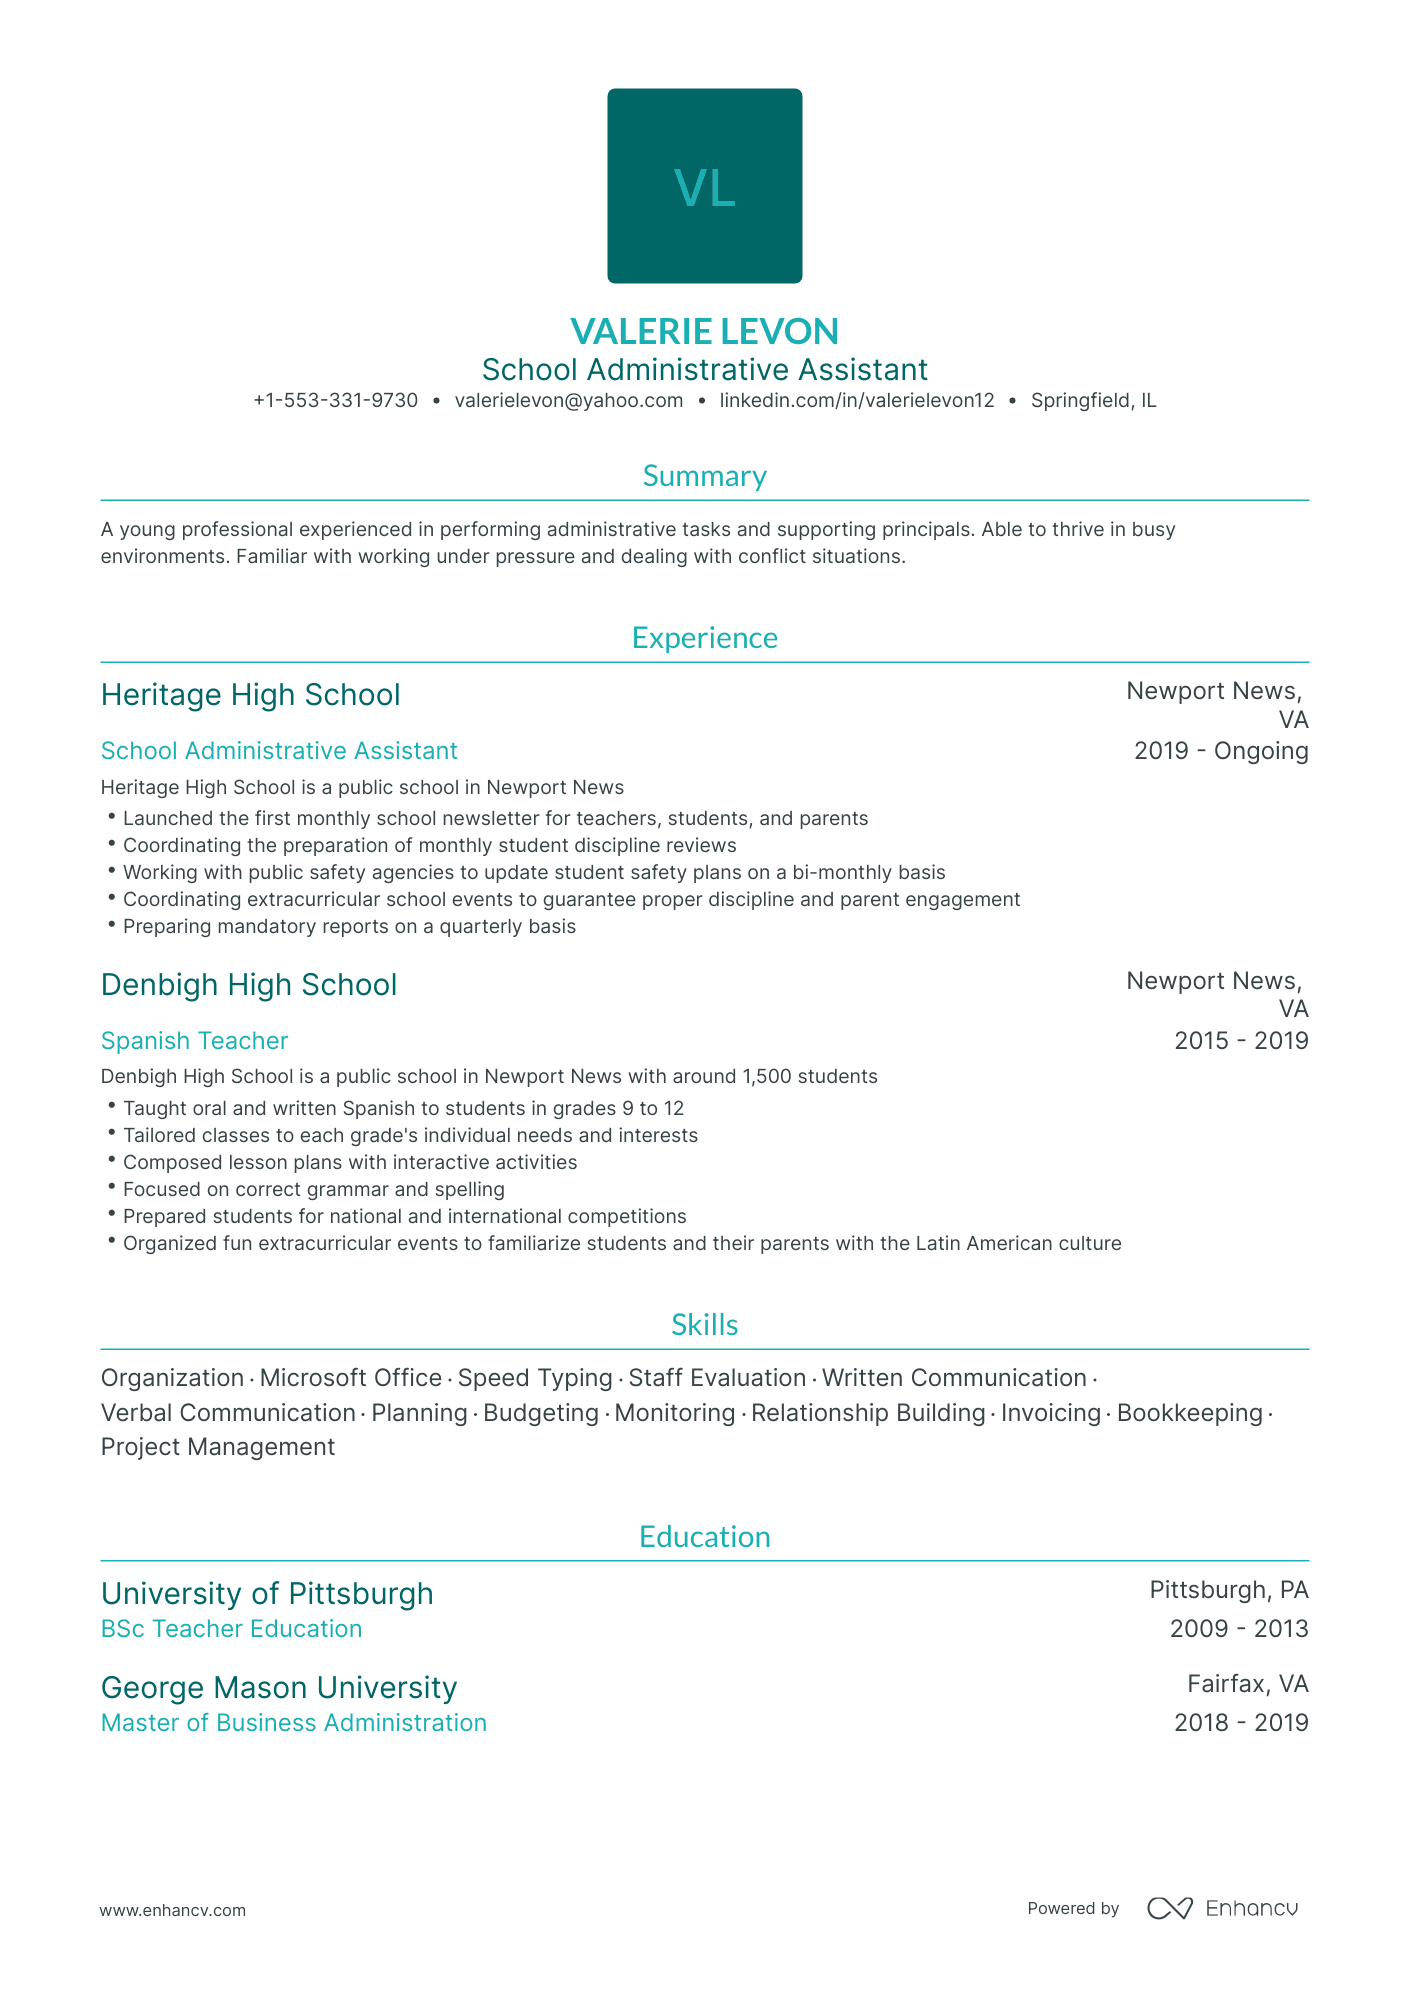 Traditional School Administrative Assistant Resume Template